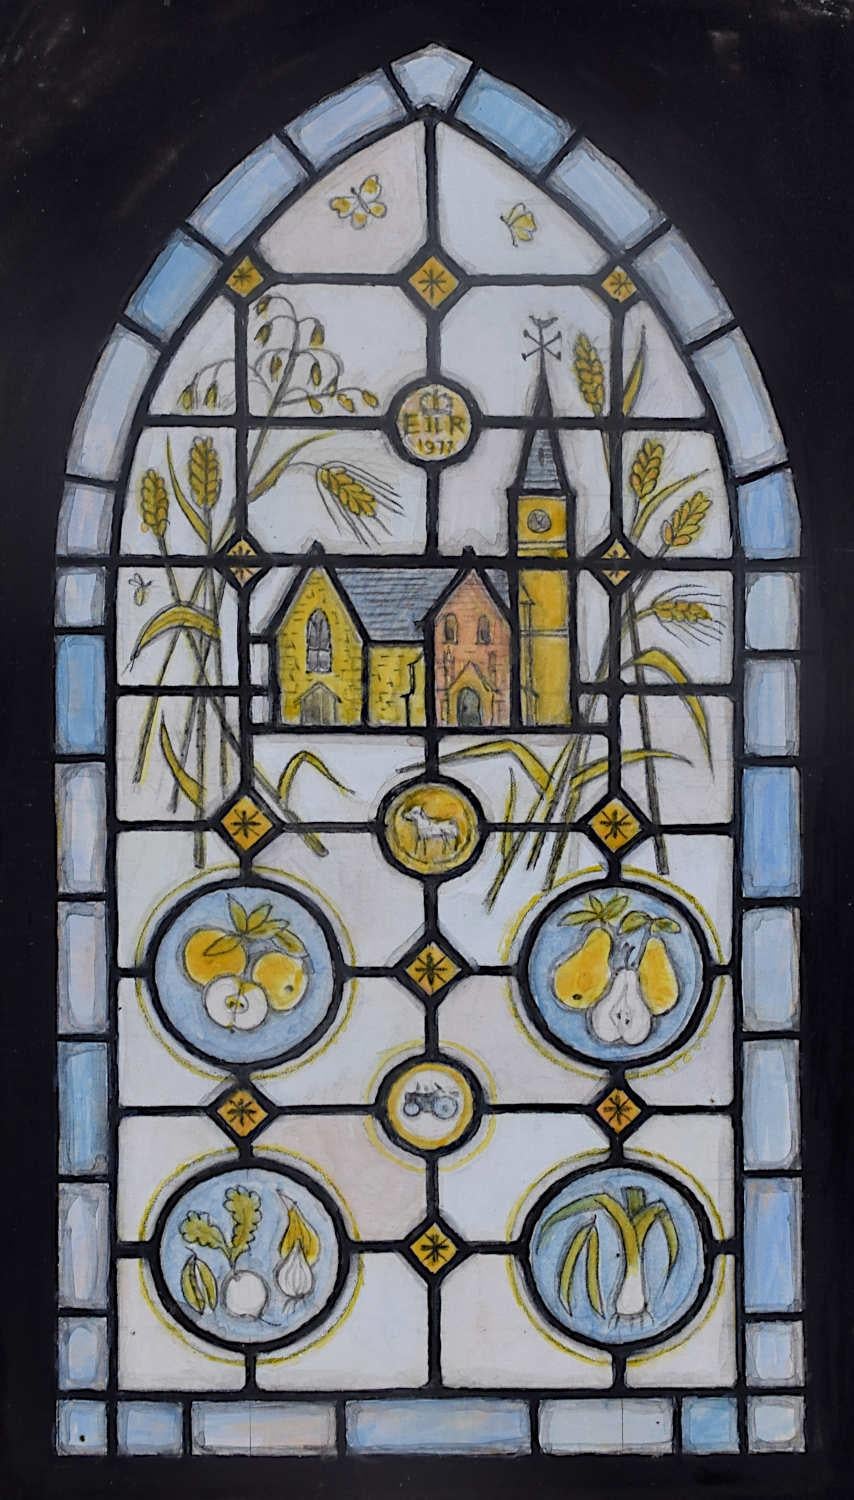 We acquired a series of watercolour stained glass designs from Jane Gray's studio. To find more scroll down to "More from this Seller" and below it click on "See all from this seller." 

Jane Gray (b.1931)
Stained Glass Design
Watercolour
16 x 9